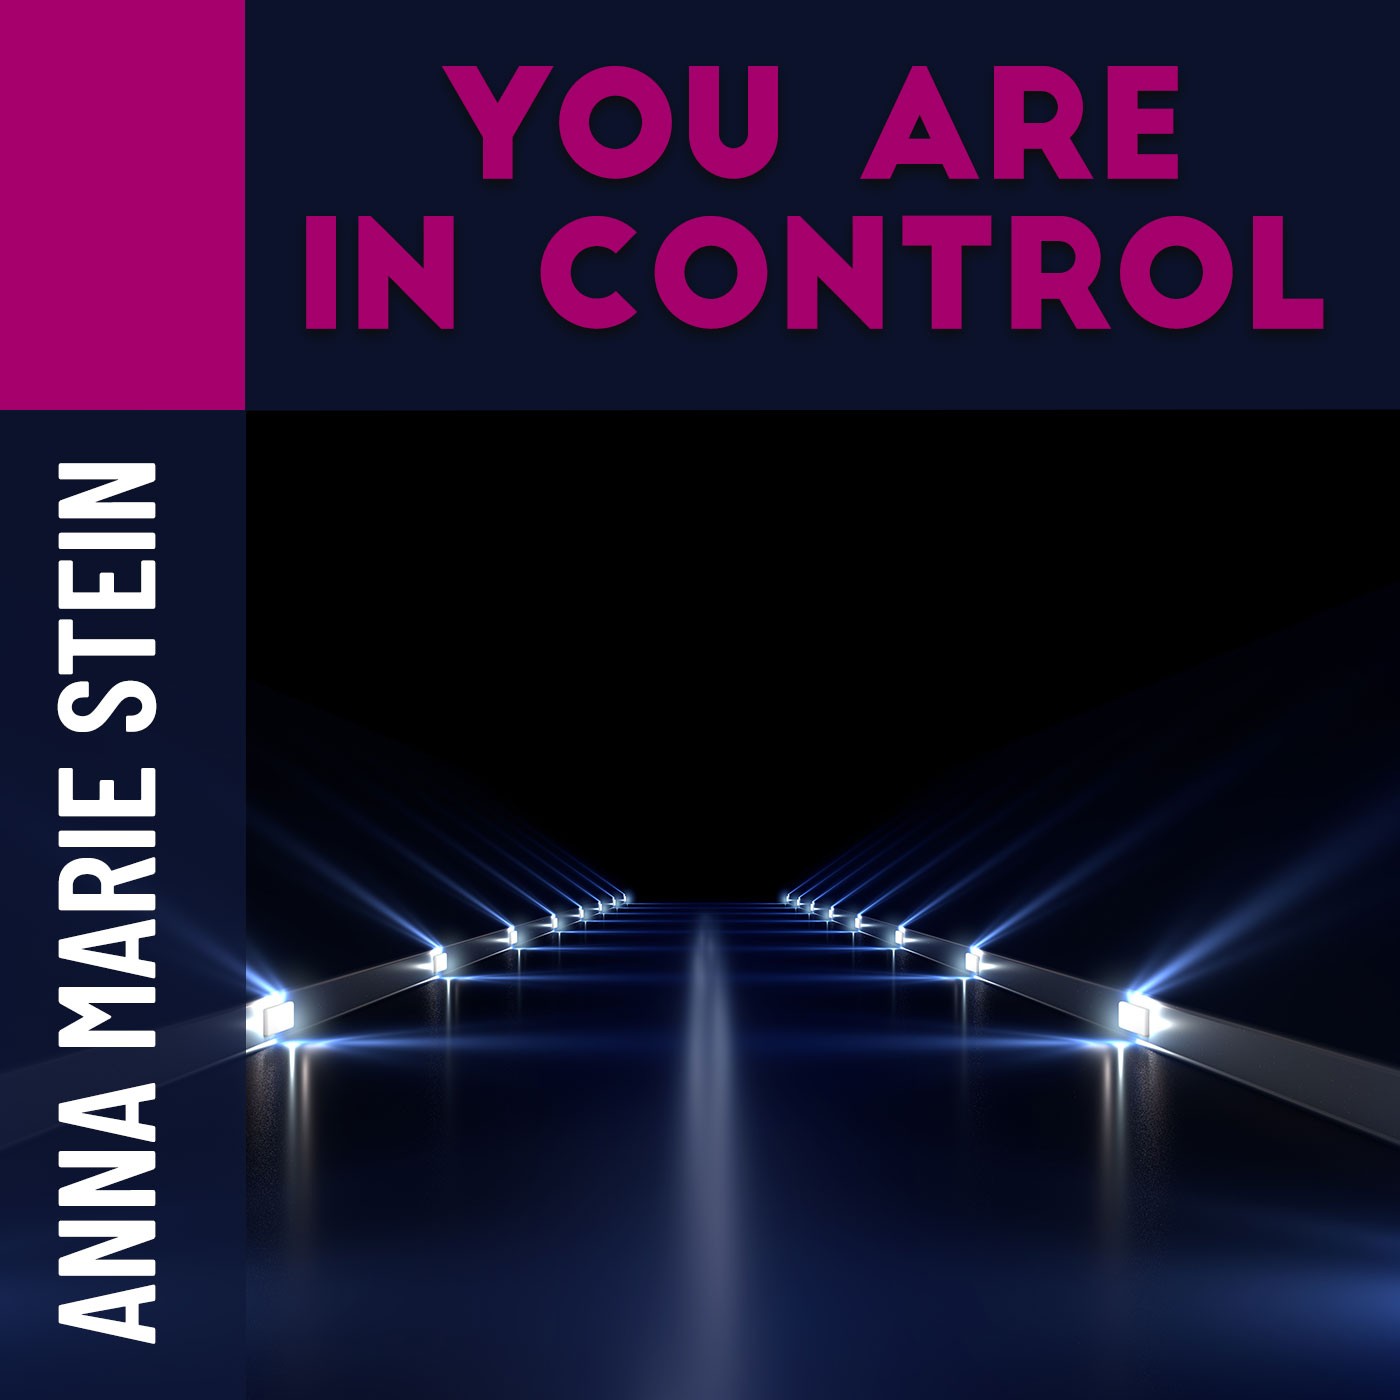 You are in control